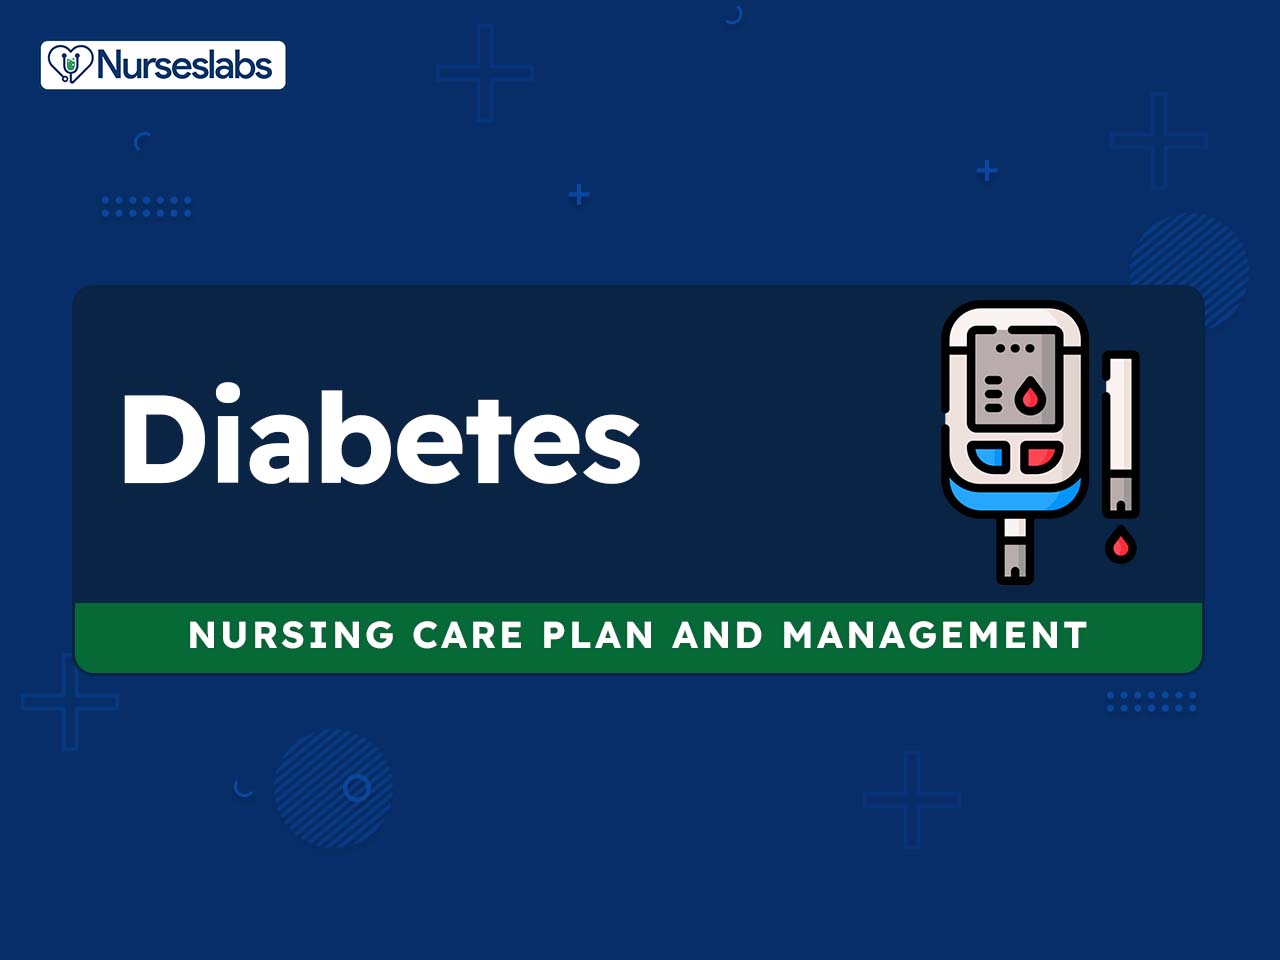 Implementing self-care plans for diabetes